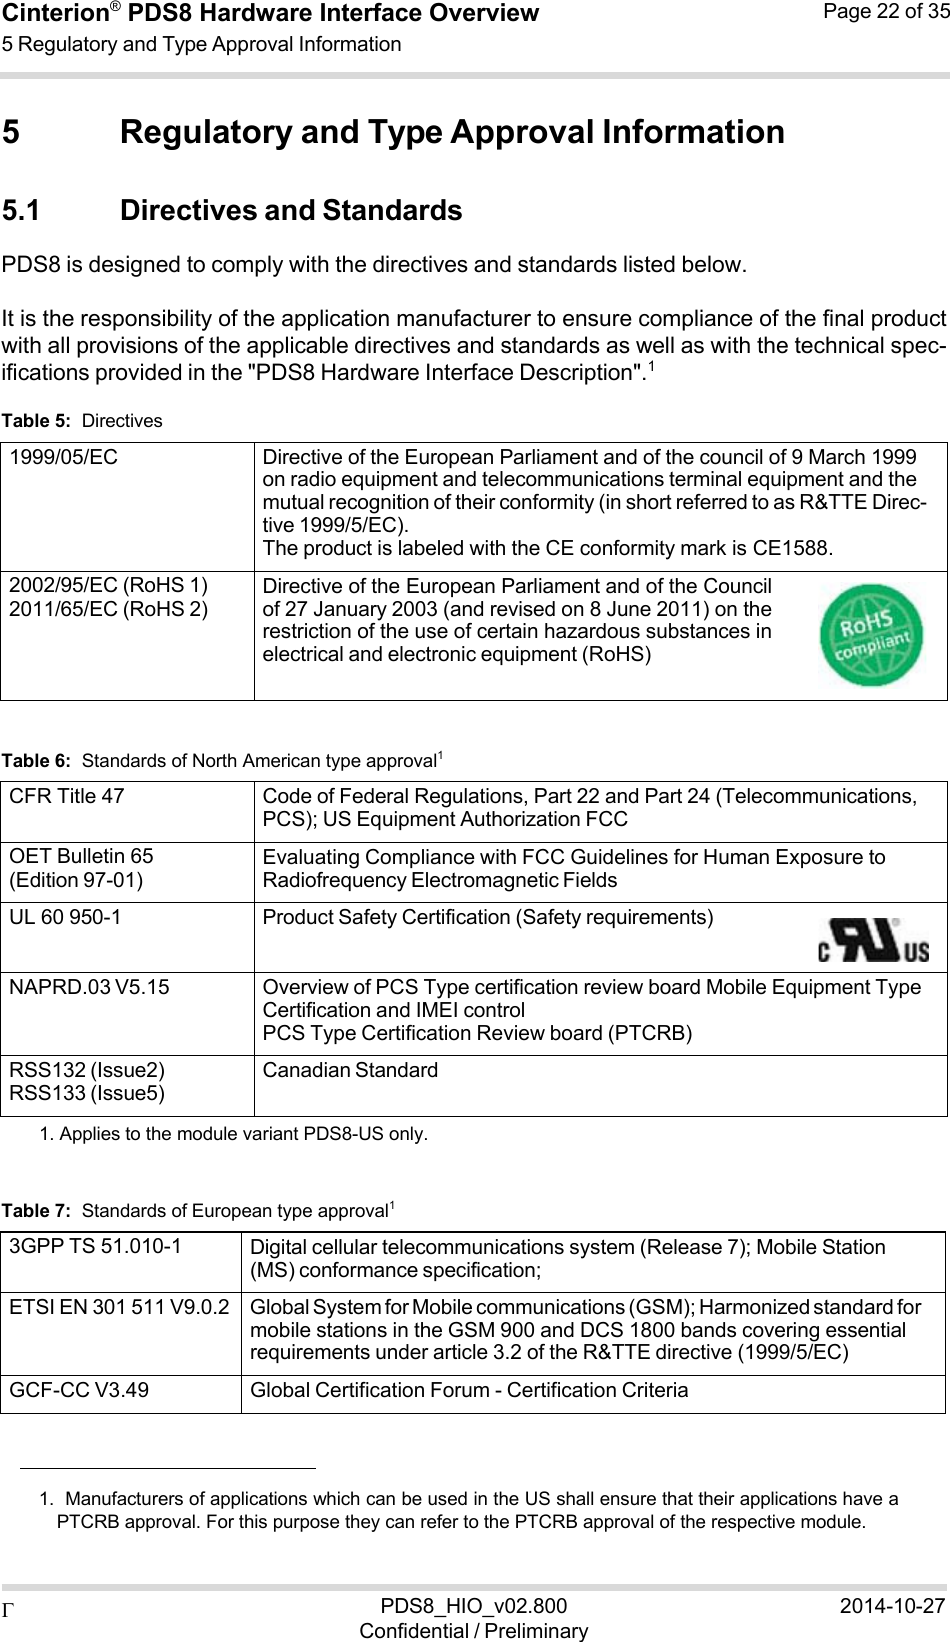 Cinterion®  PDS8 Hardware Interface Overview 5 Regulatory and Type Approval Information Page 22 of 35 PDS8_HIO_v02.800Confidential / Preliminary2014-10-27   5 Regulatory and Type Approval Information  5.1 Directives and Standards PDS8 is designed to comply with the directives and standards listed below.  It is the responsibility of the application manufacturer to ensure compliance of the final product with all provisions of the applicable directives and standards as well as with the technical spec- ifications provided in the &quot;PDS8 Hardware Interface Description&quot;.1  Table 5:  Directives  1999/05/EC Directive of the European Parliament and of the council of 9 March 1999 on radio equipment and telecommunications terminal equipment and the mutual recognition of their conformity (in short referred to as R&amp;TTE Direc- tive 1999/5/EC). The product is labeled with the CE conformity mark is CE1588. 2002/95/EC (RoHS 1) 2011/65/EC (RoHS 2) Directive of the European Parliament and of the Council of 27 January 2003 (and revised on 8 June 2011) on the restriction of the use of certain hazardous substances in electrical and electronic equipment (RoHS)   Table 6:  Standards of North American type approval1  CFR Title 47 Code of Federal Regulations, Part 22 and Part 24 (Telecommunications, PCS); US Equipment Authorization FCC OET Bulletin 65 (Edition 97-01) Evaluating Compliance with FCC Guidelines for Human Exposure to Radiofrequency Electromagnetic Fields UL 60 950-1 Product Safety Certification (Safety requirements)NAPRD.03 V5.15 Overview of PCS Type certification review board Mobile Equipment Type Certification and IMEI control PCS Type Certification Review board (PTCRB) RSS132 (Issue2) RSS133 (Issue5) Canadian Standard1. Applies to the module variant PDS8-US only.   Table 7:  Standards of European type approval1  3GPP TS 51.010-1 Digital cellular telecommunications system (Release 7); Mobile Station (MS) conformance specification; ETSI EN 301 511 V9.0.2 Global System for Mobile communications (GSM); Harmonized standard for mobile stations in the GSM 900 and DCS 1800 bands covering essential requirements under article 3.2 of the R&amp;TTE directive (1999/5/EC) GCF-CC V3.49 Global Certification Forum - Certification Criteria    1.  Manufacturers of applications which can be used in the US shall ensure that their applications have a PTCRB approval. For this purpose they can refer to the PTCRB approval of the respective module. 